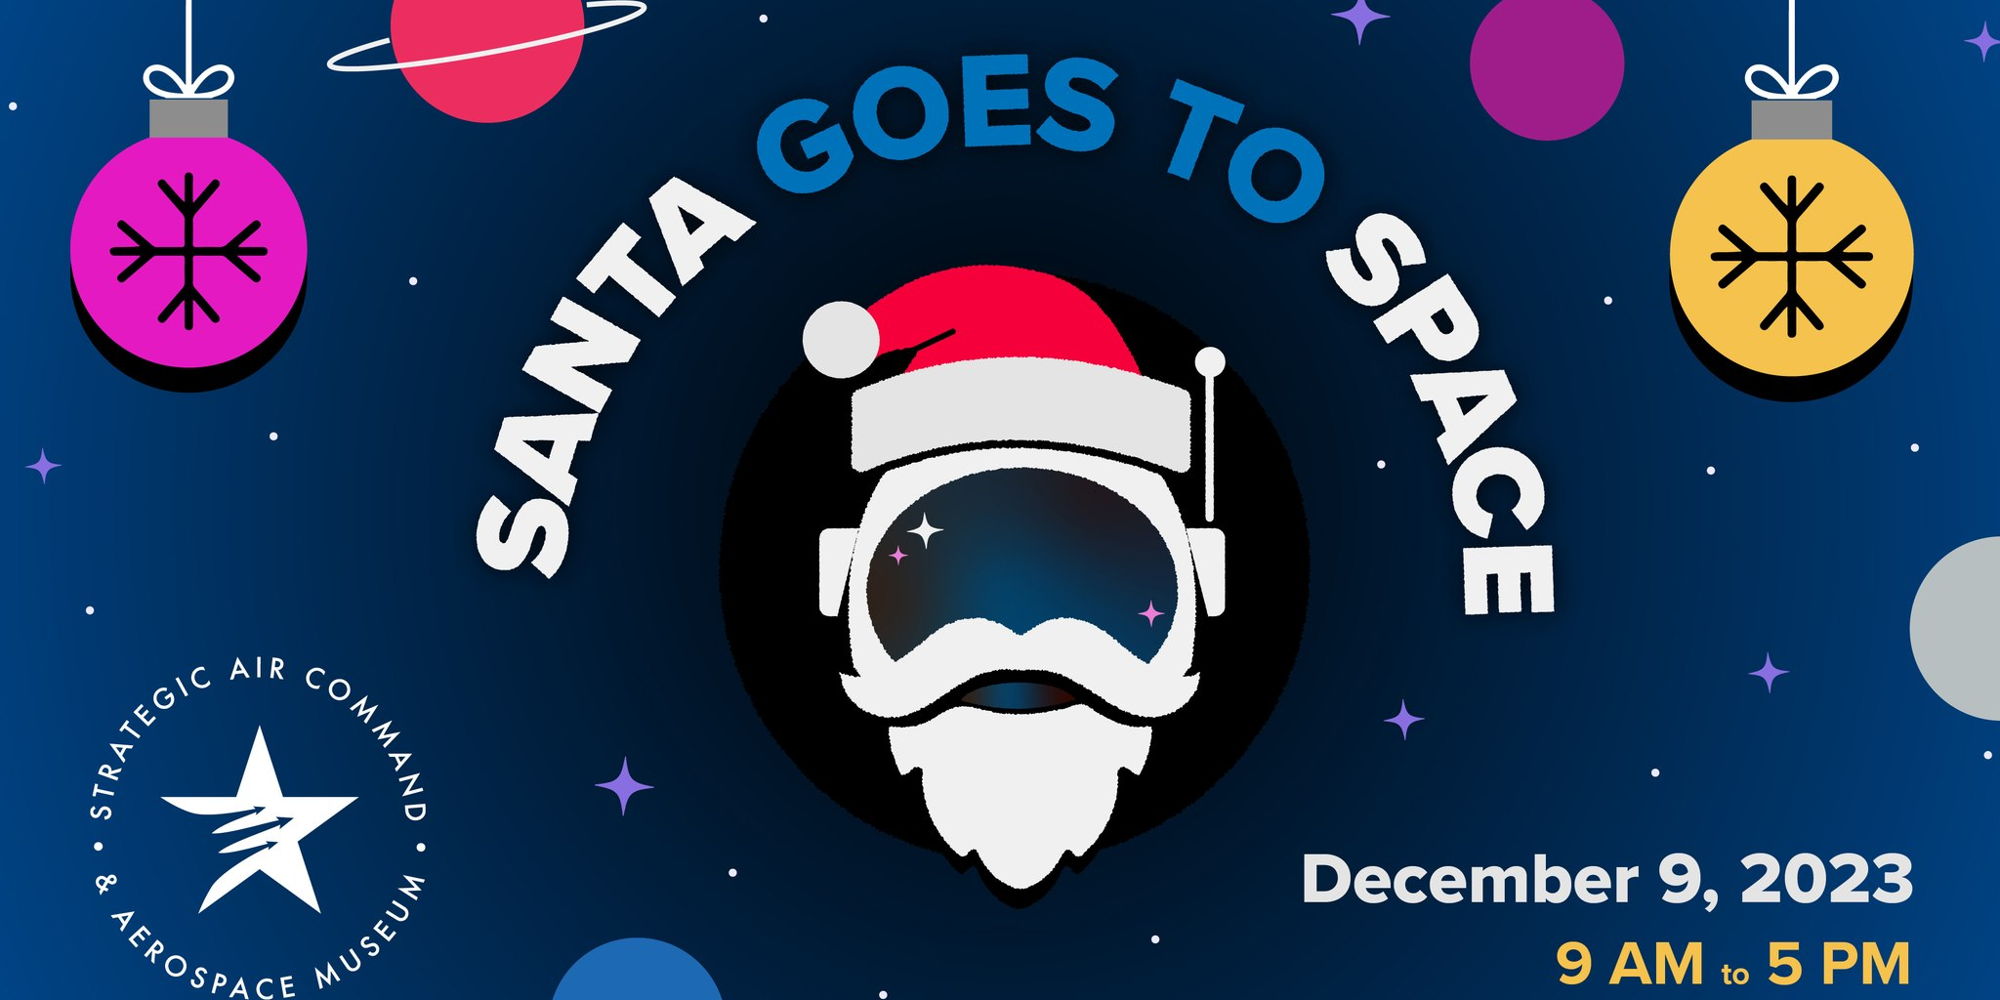 Santa Goes To Space promotional image